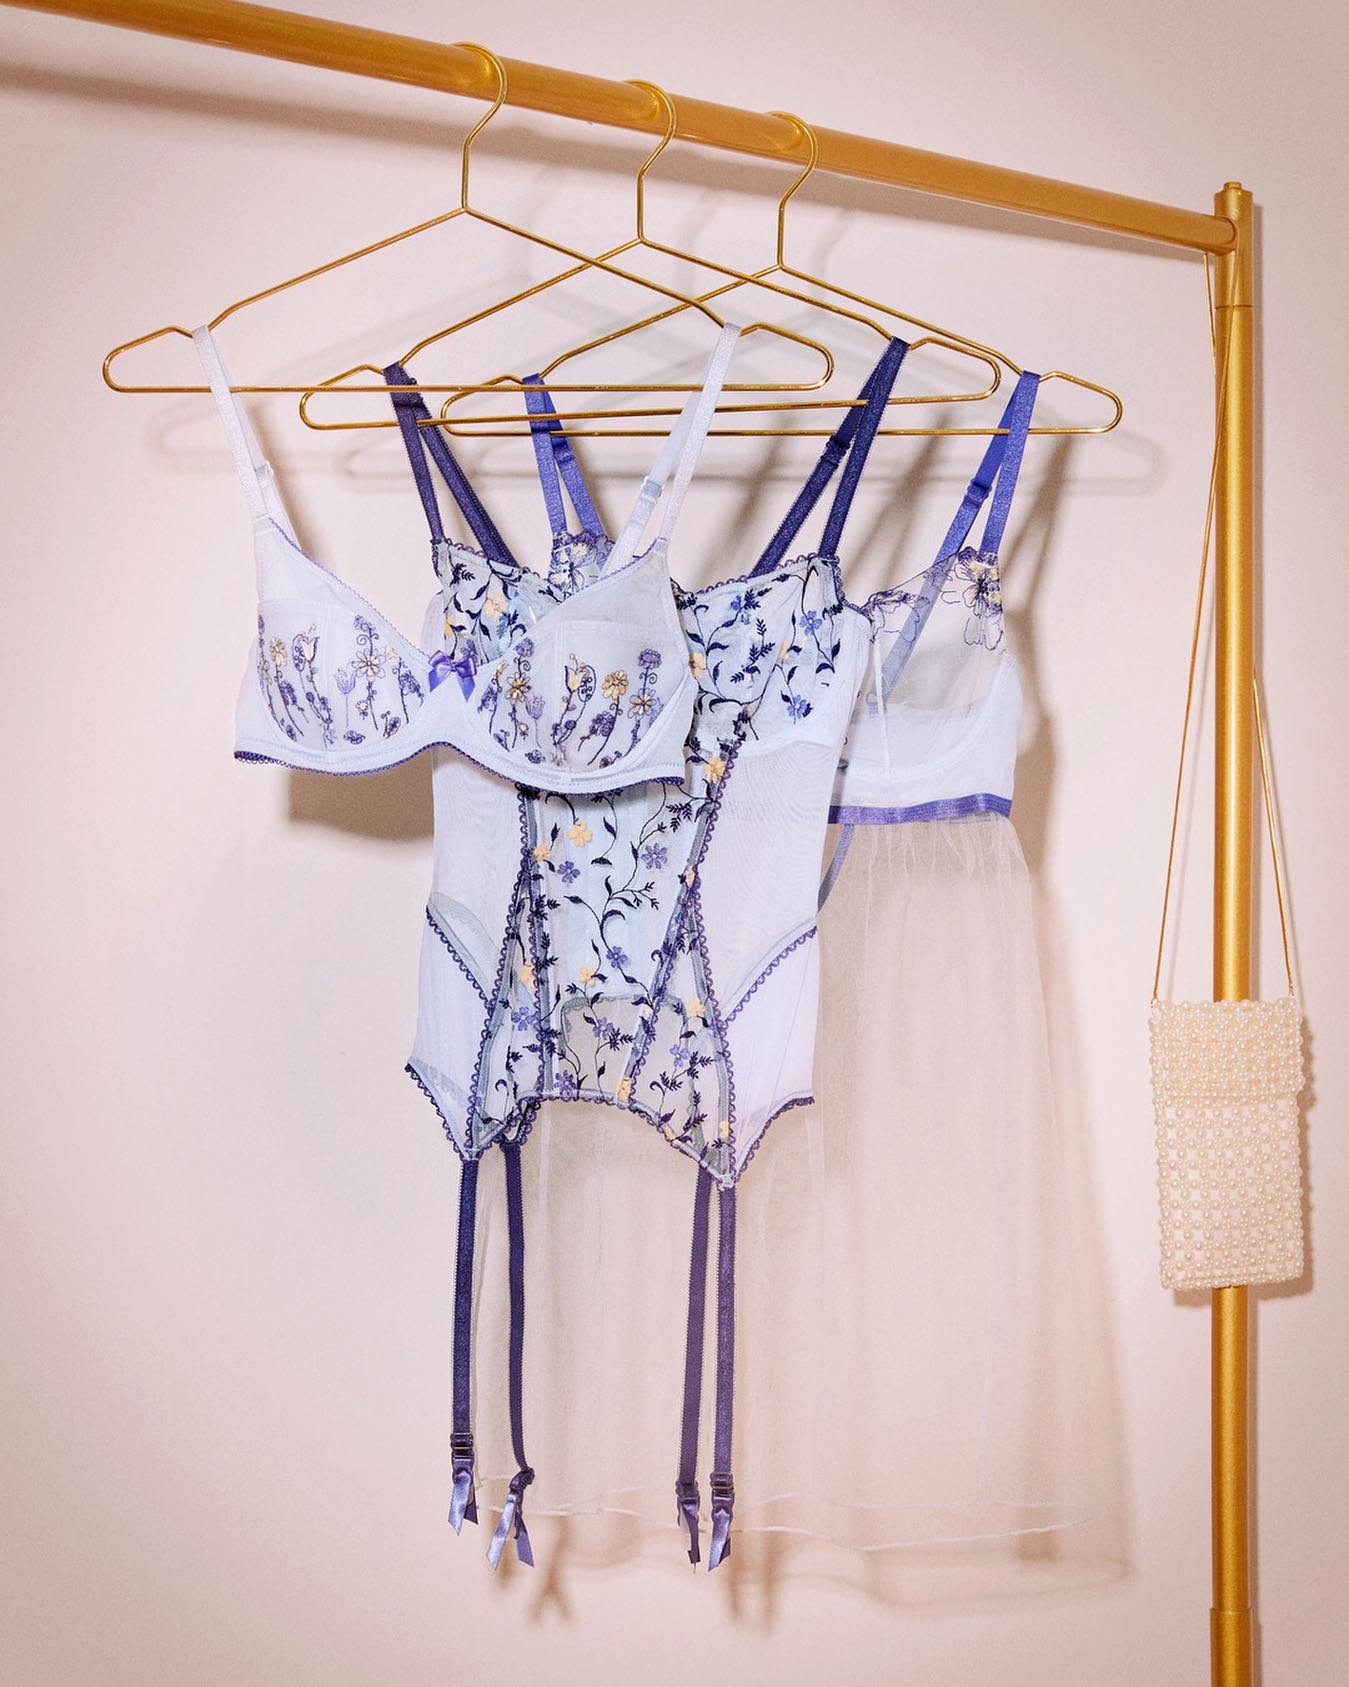 An Update on Adore Me Lingerie, Part 2b: Even More Thoughts on the New  Collection